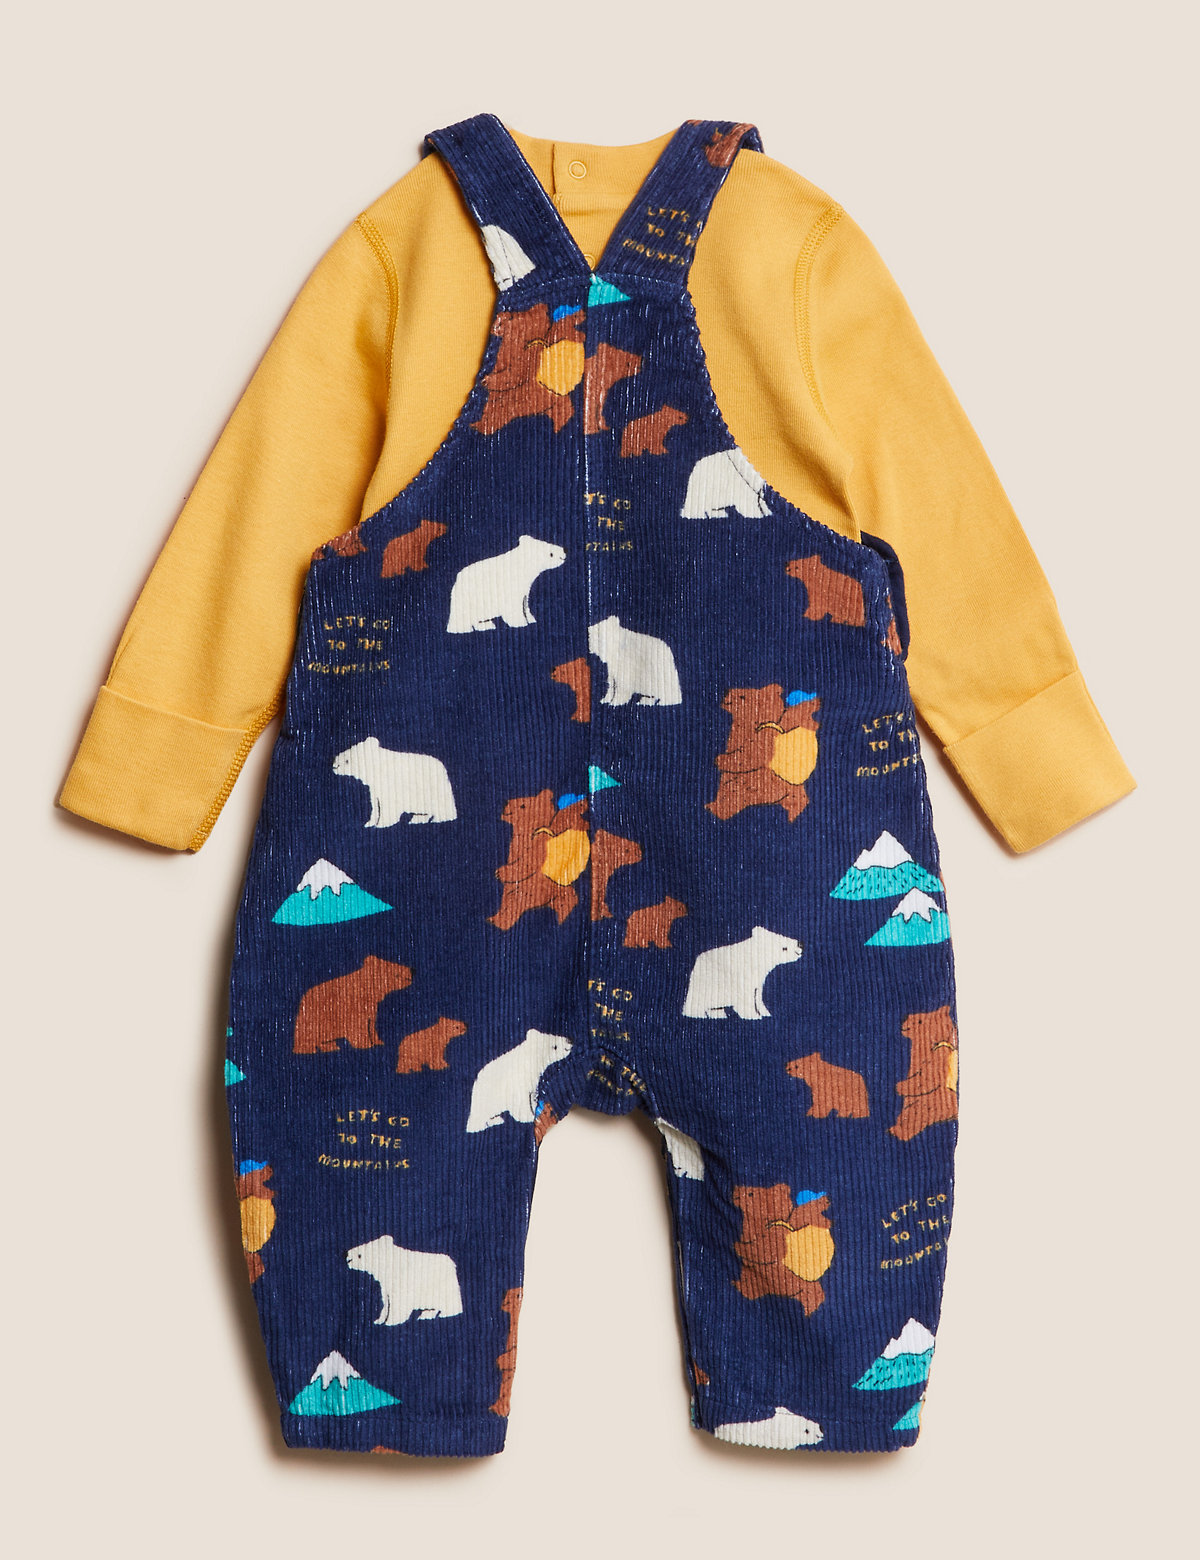 2pc Pure Cotton Bear Print Dungaree Outfit